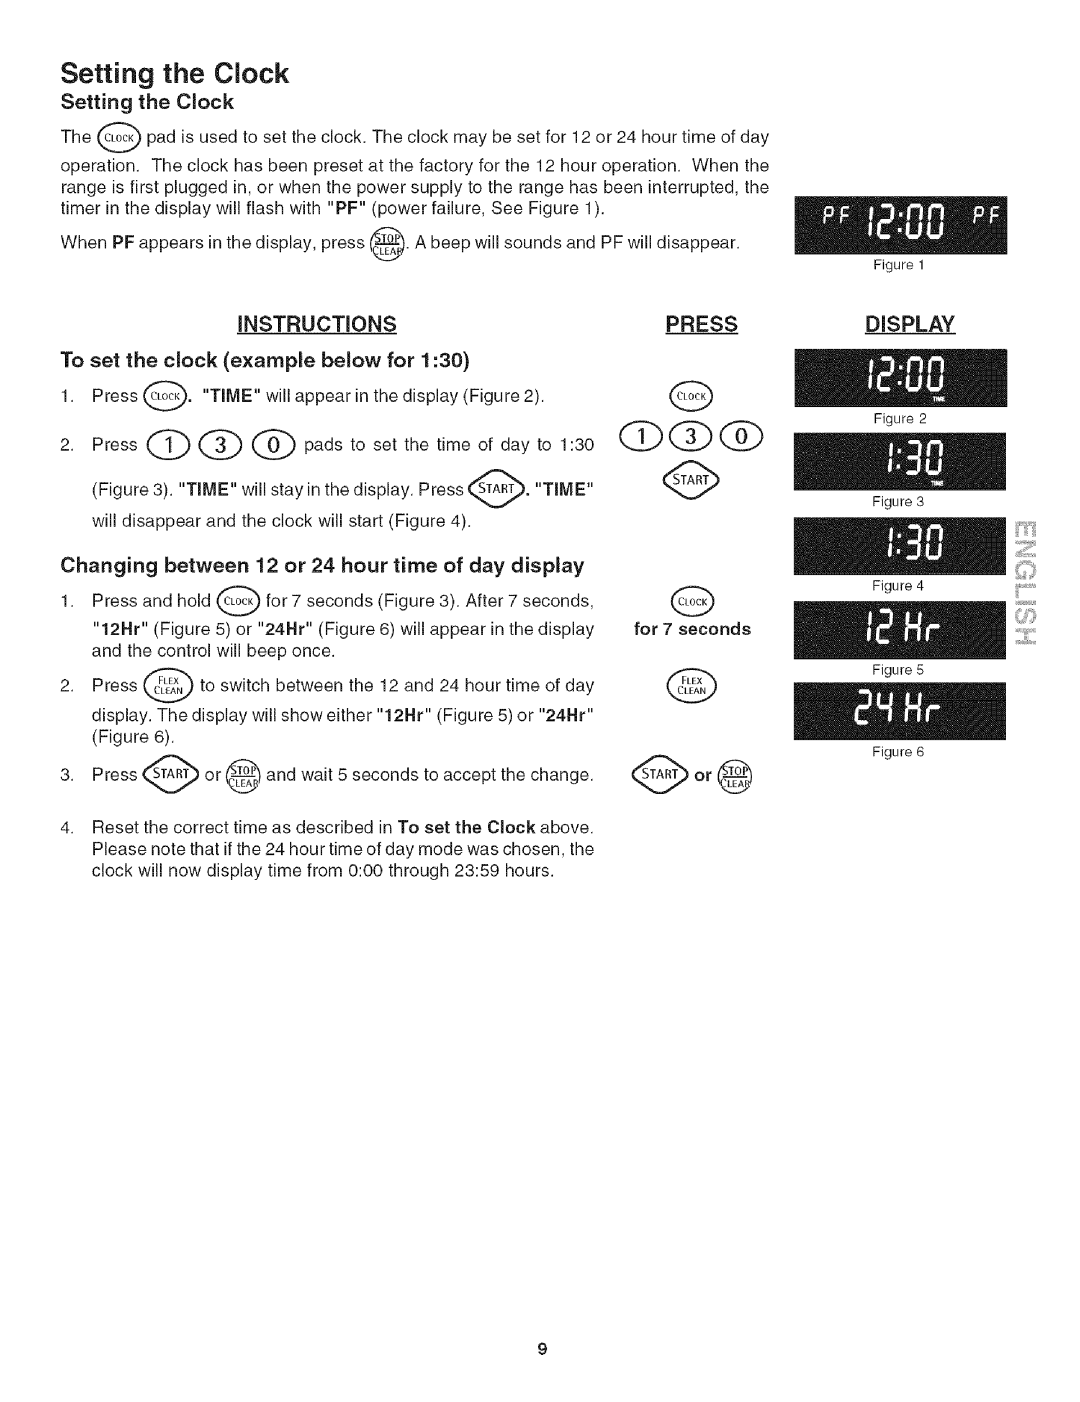 Kenmore 790.4906 manual Setting the Clock, Display, Instructionspress, To set the clock example below for 1 